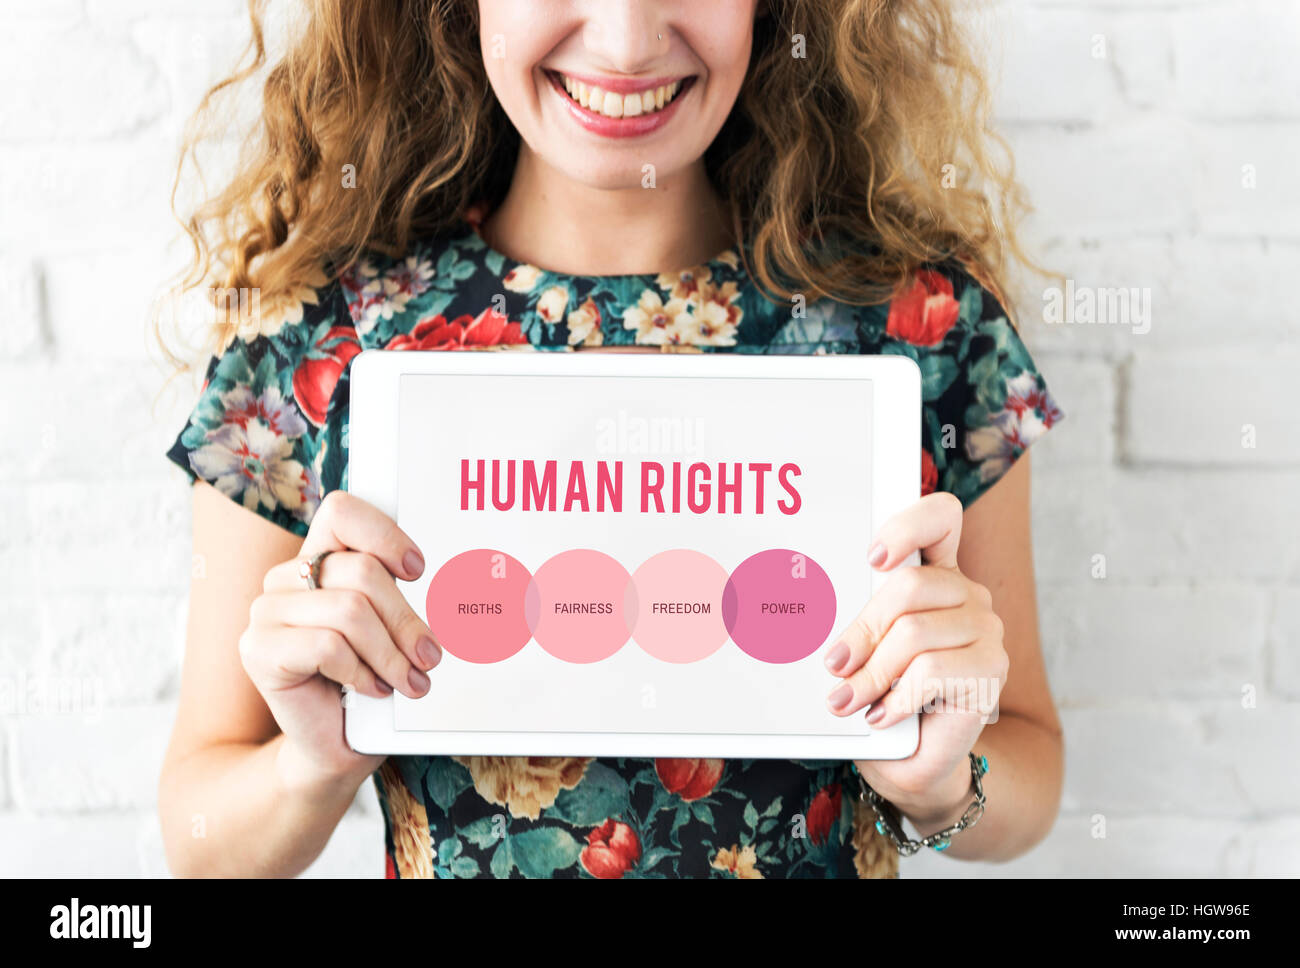 Women Rights Human Gender Equal Opportunity Concept Stock Photo